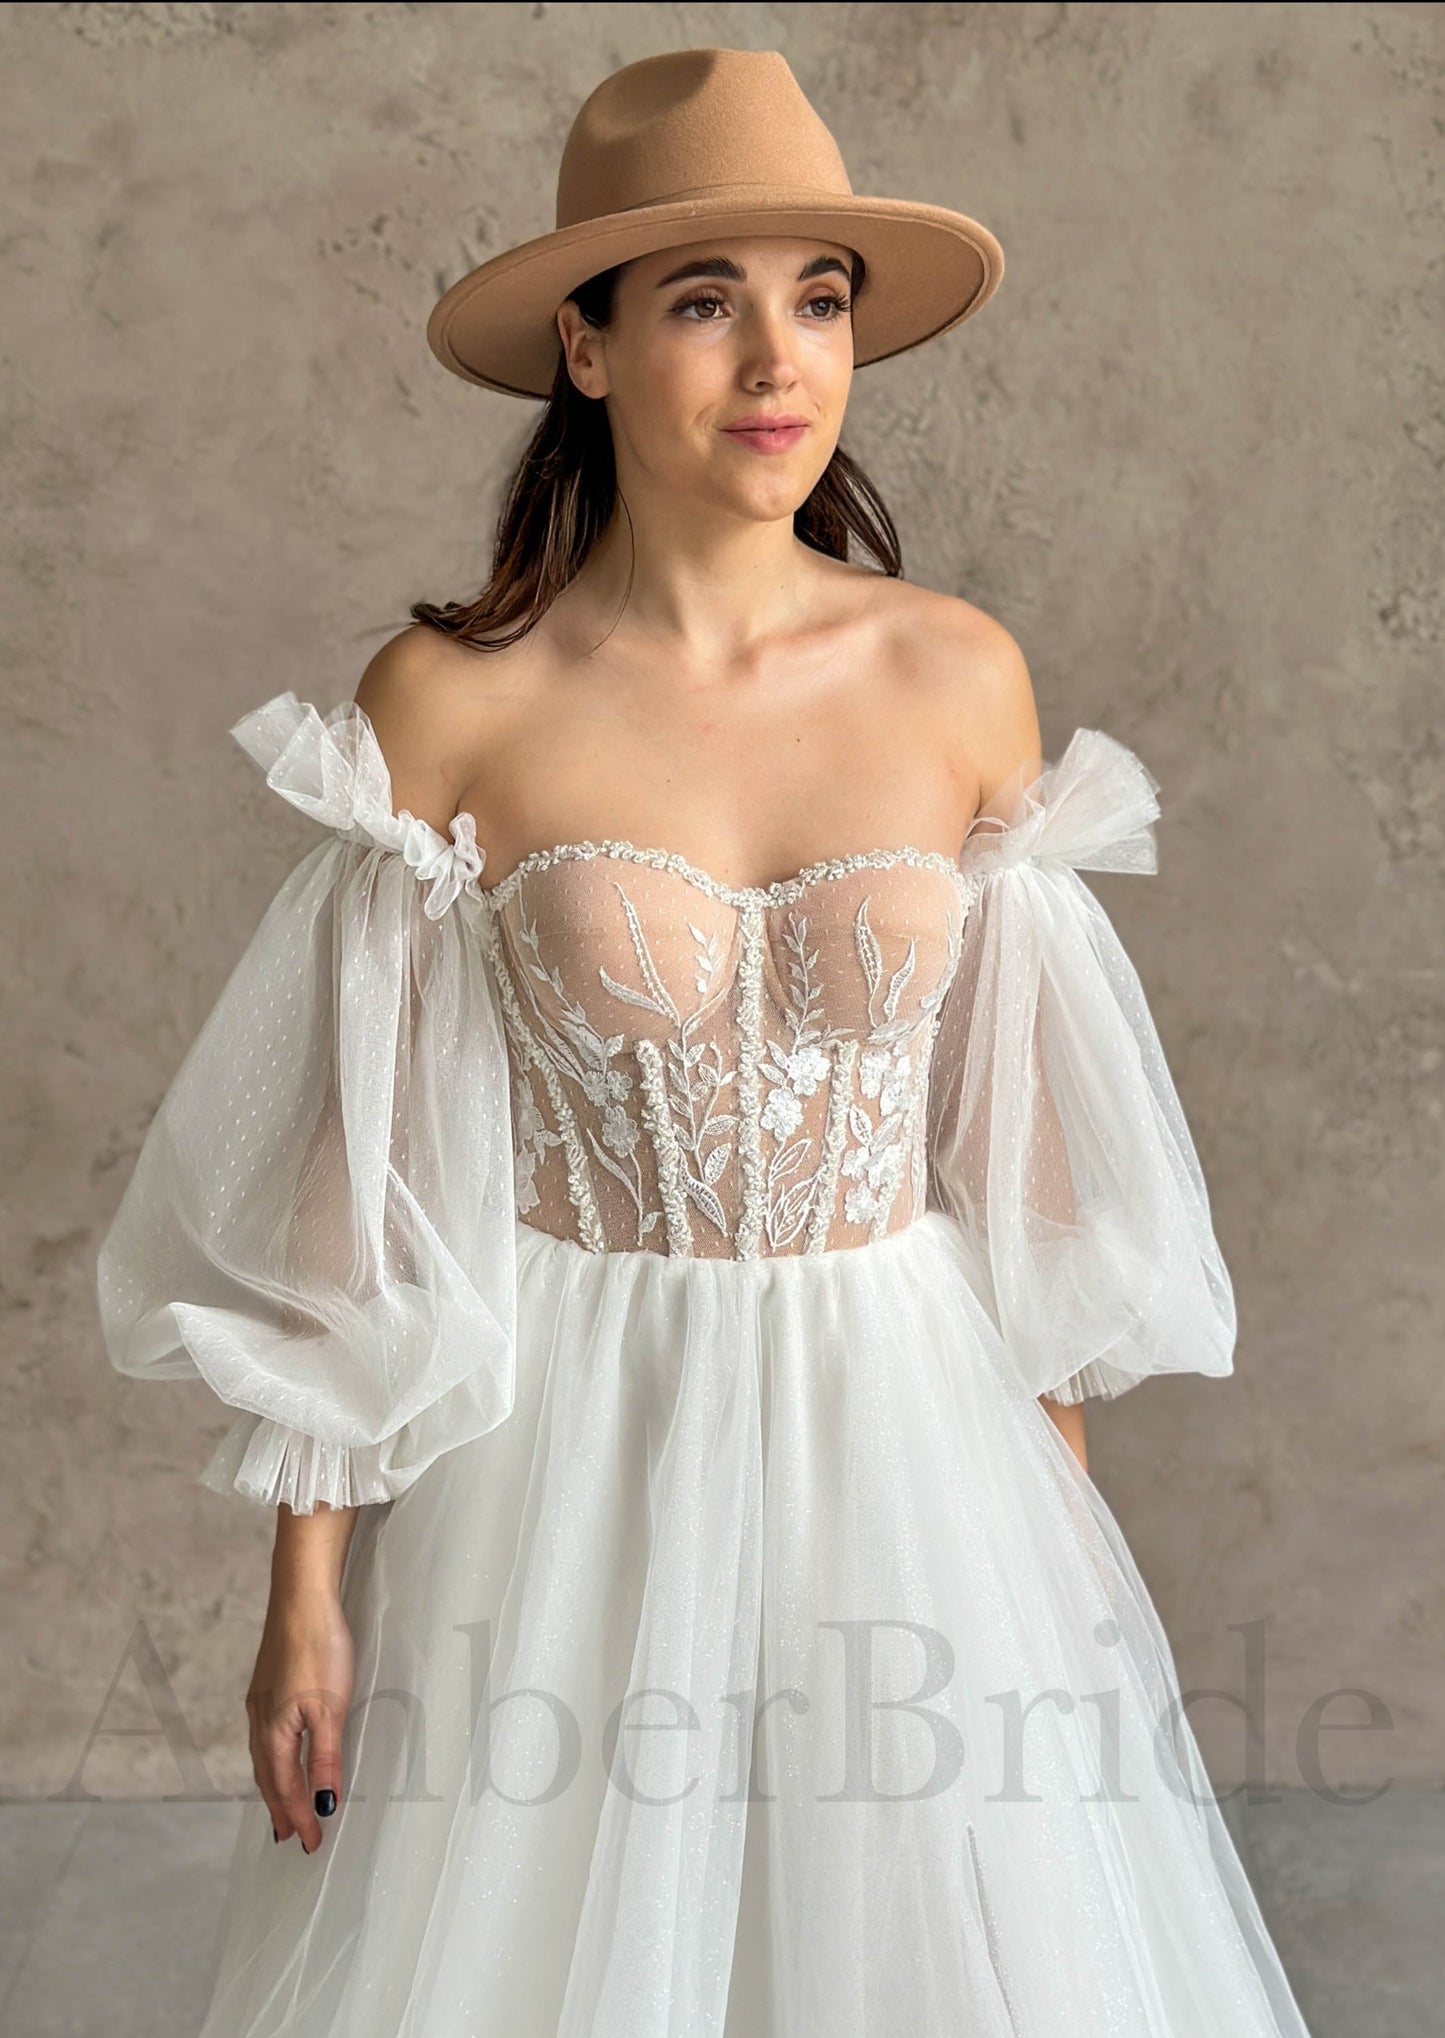 Rustic A Line Wedding Dress with Long Puffy Sleeves and Floral Accents